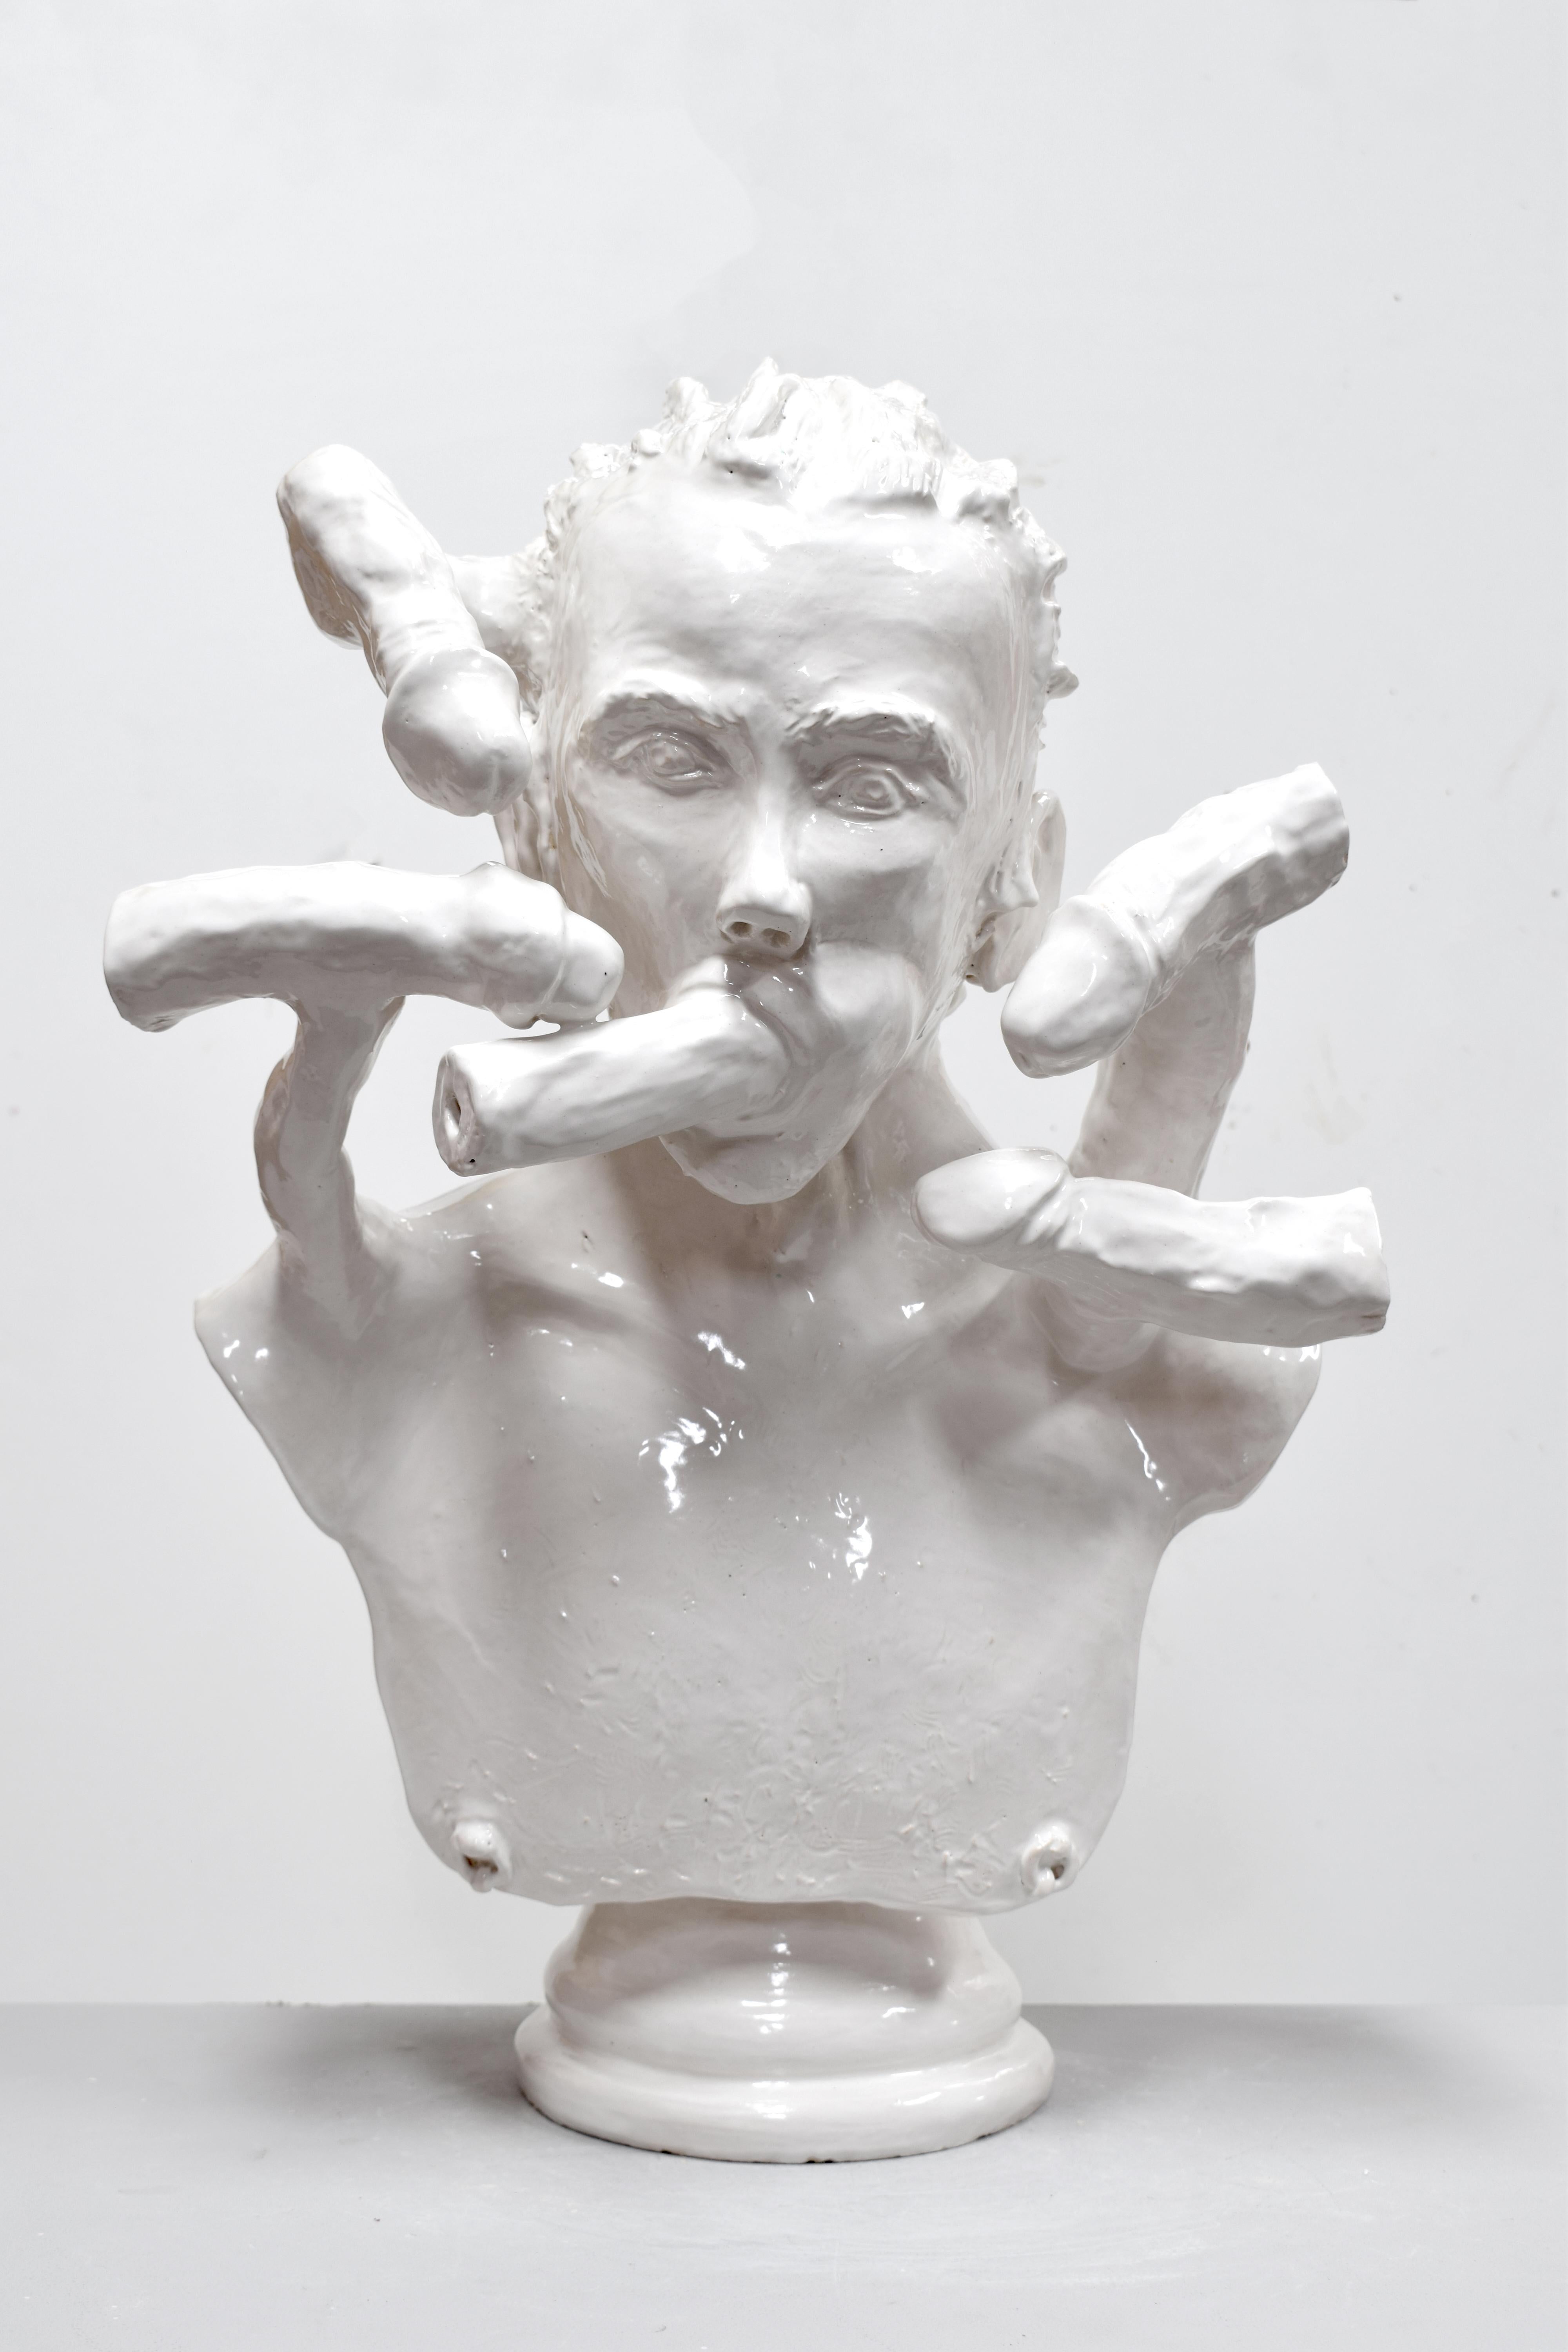 Chris Rijk Figurative Sculpture - Selfportrait surrounded by willies